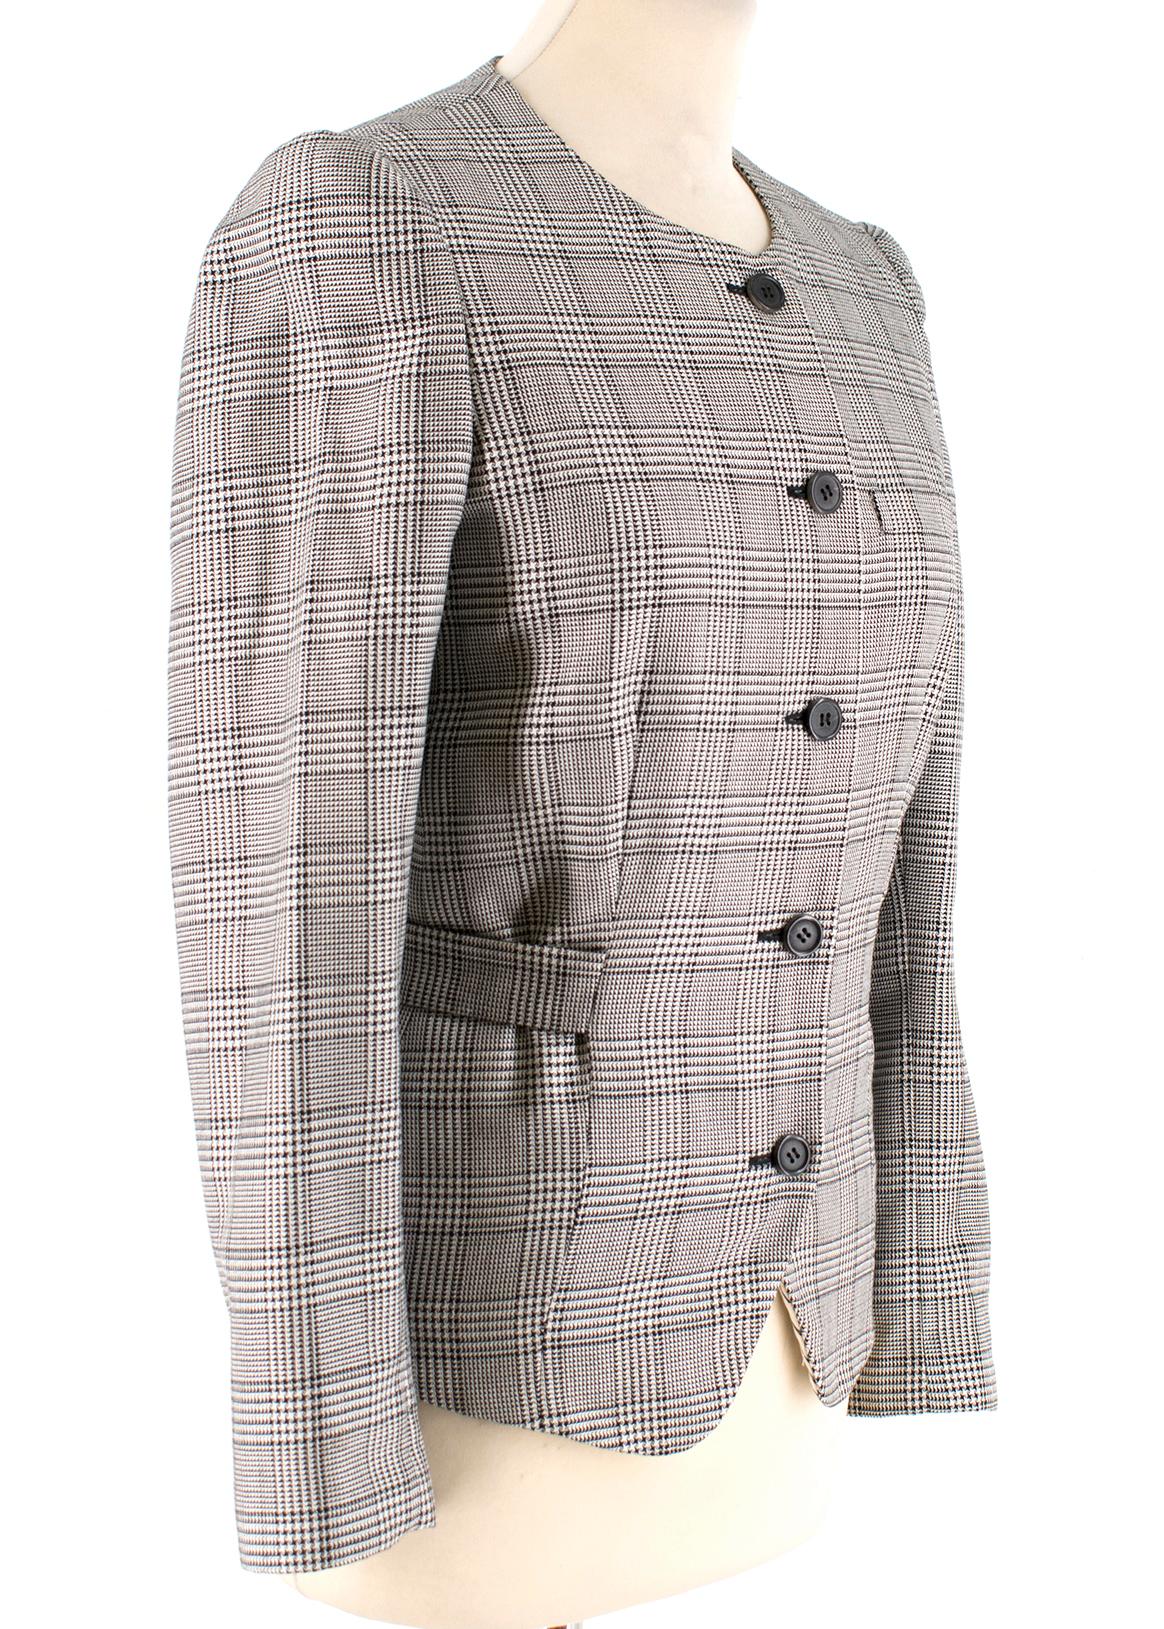 Balenciaga cream and black houndstooth light blazer with wrap around tie featuring button fastening.

- Made in Italy
- Do not wash

Please note, these items are pre-owned and may show signs of
being stored even when unworn and unused. This is